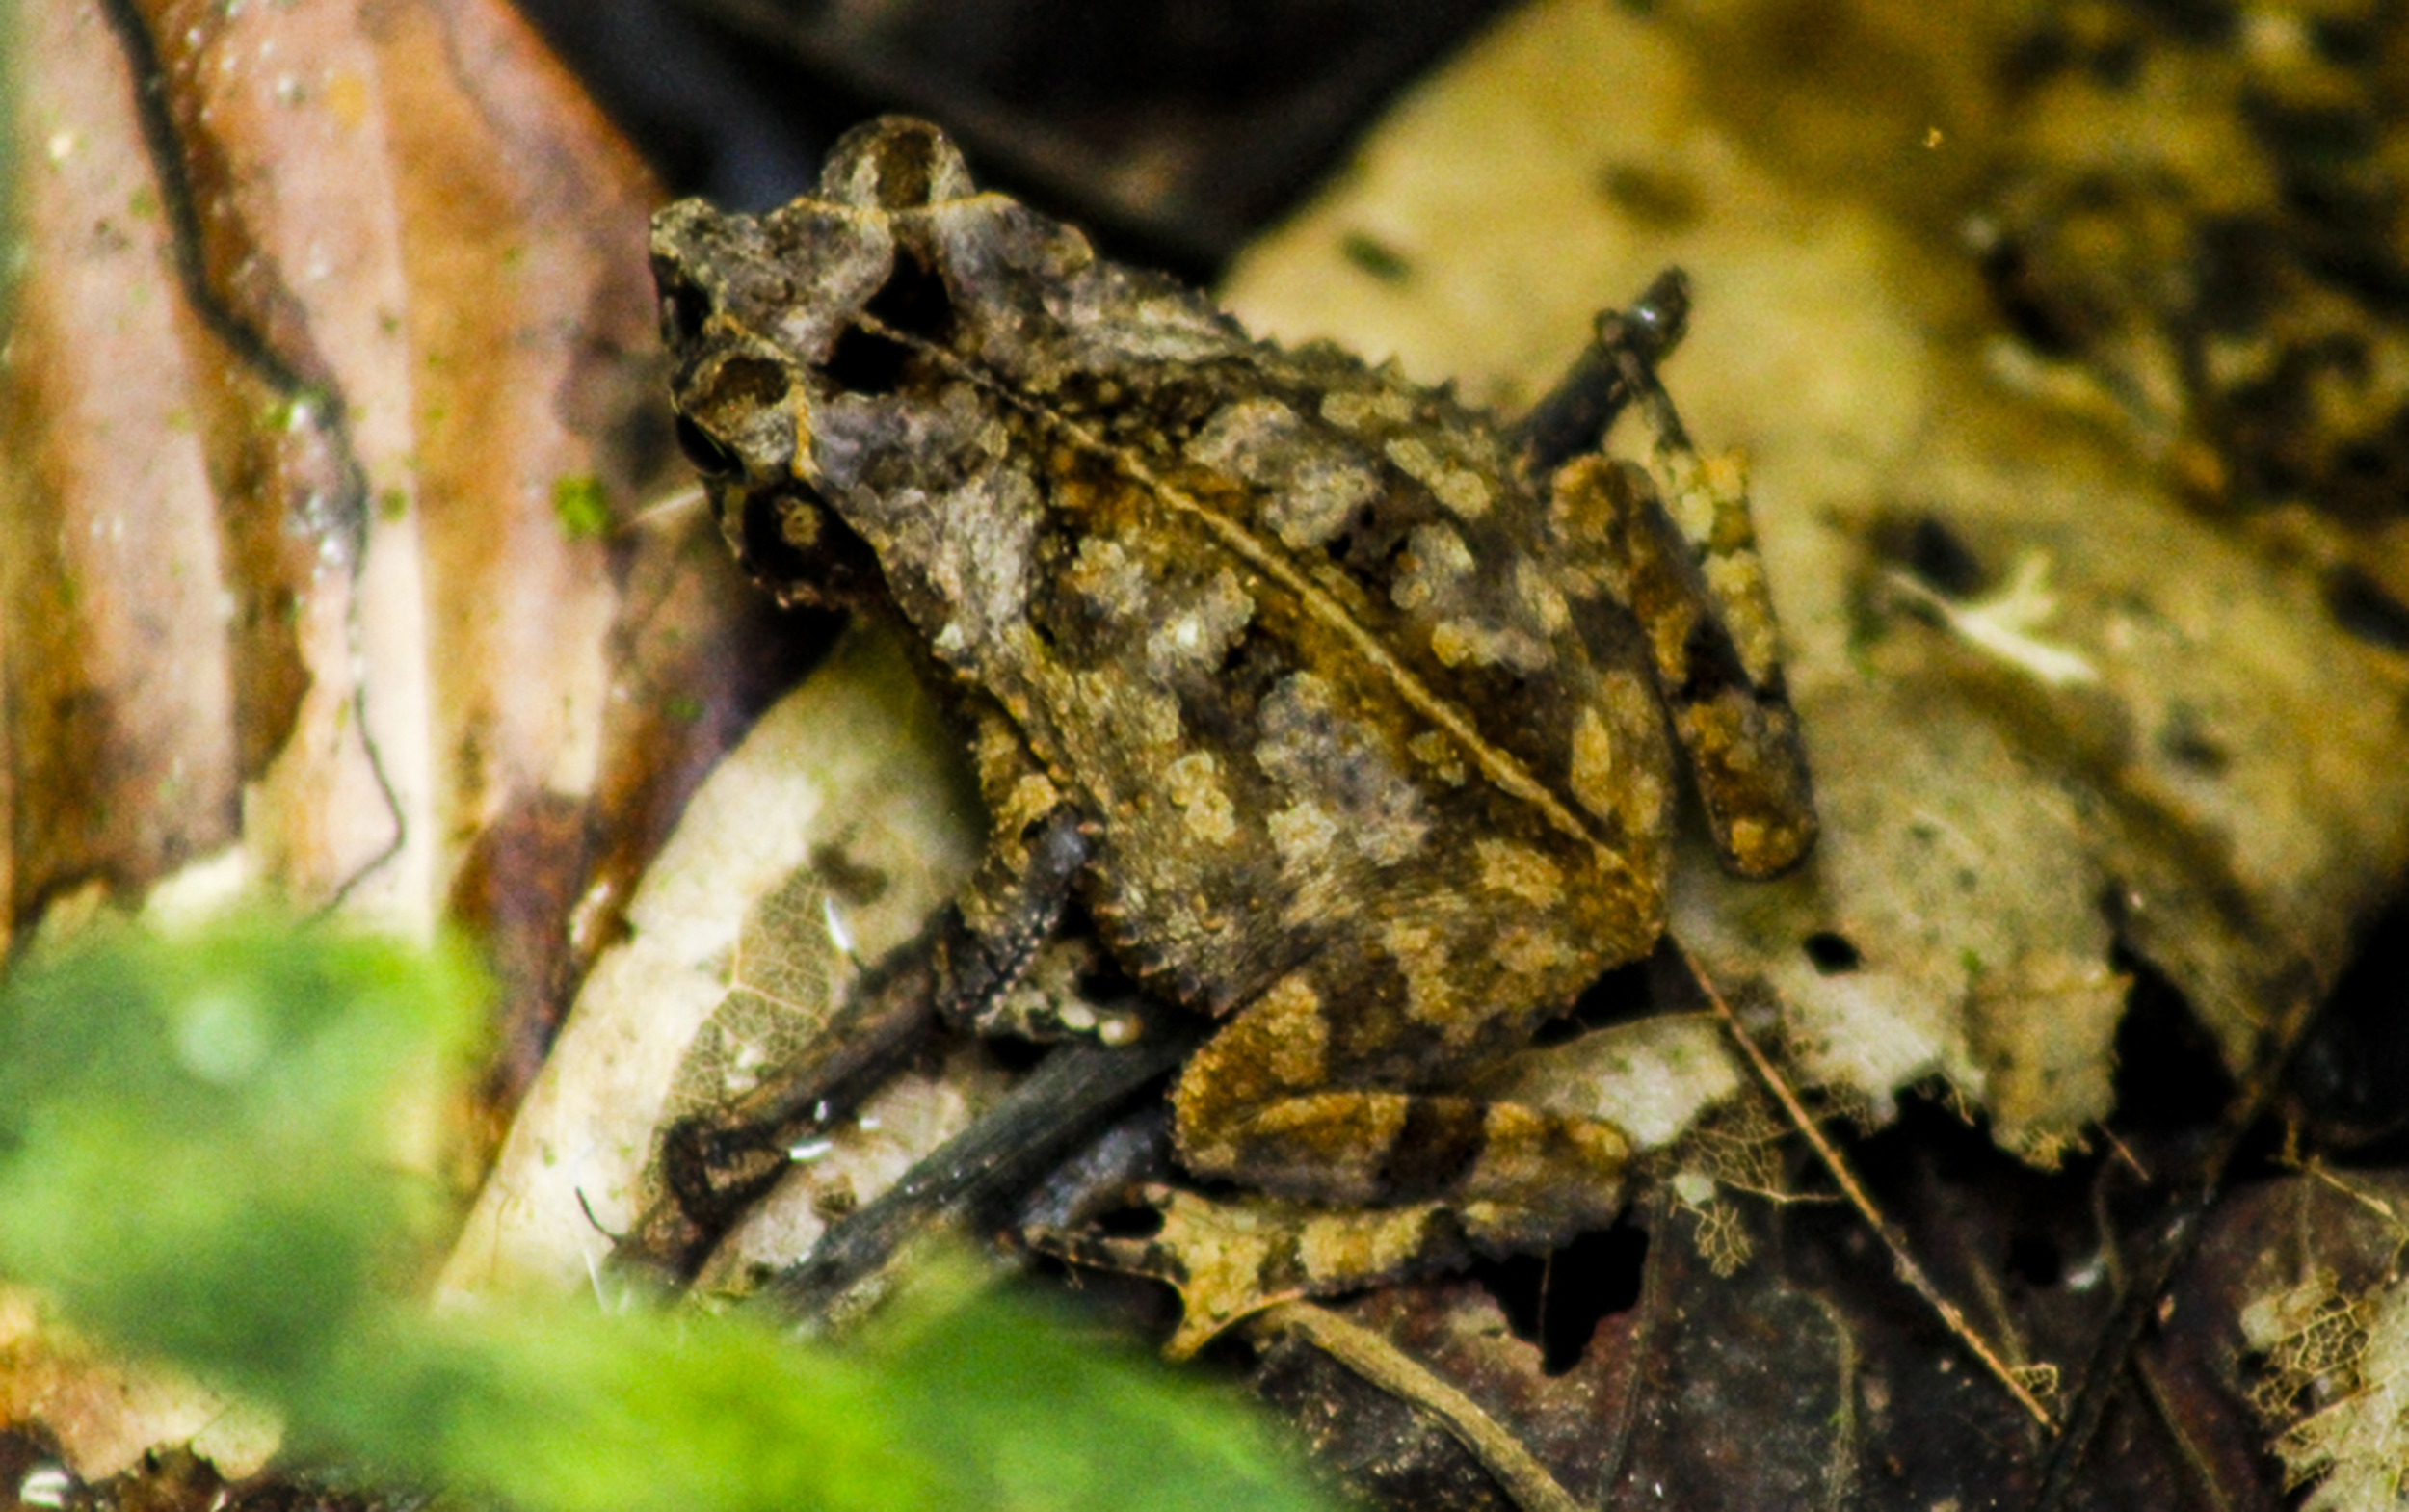 At rest, a leaf frog looks so much like forest detritus that it's invisible